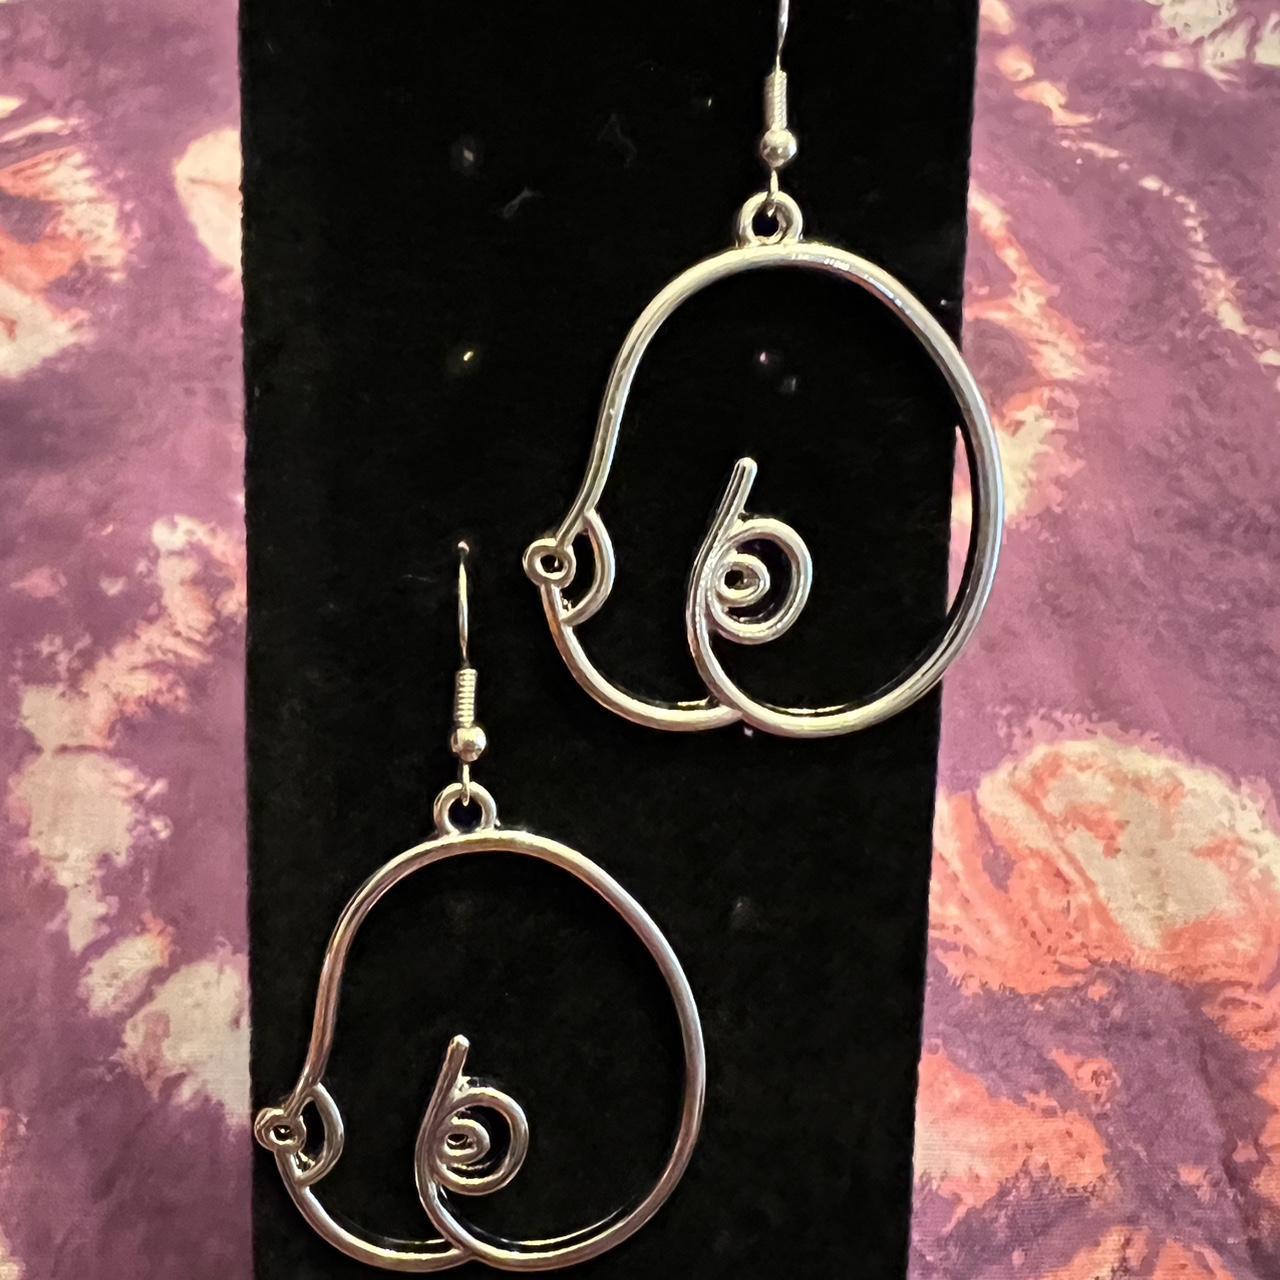 Boobies earrings 💕 (medium size, I also have a - Depop